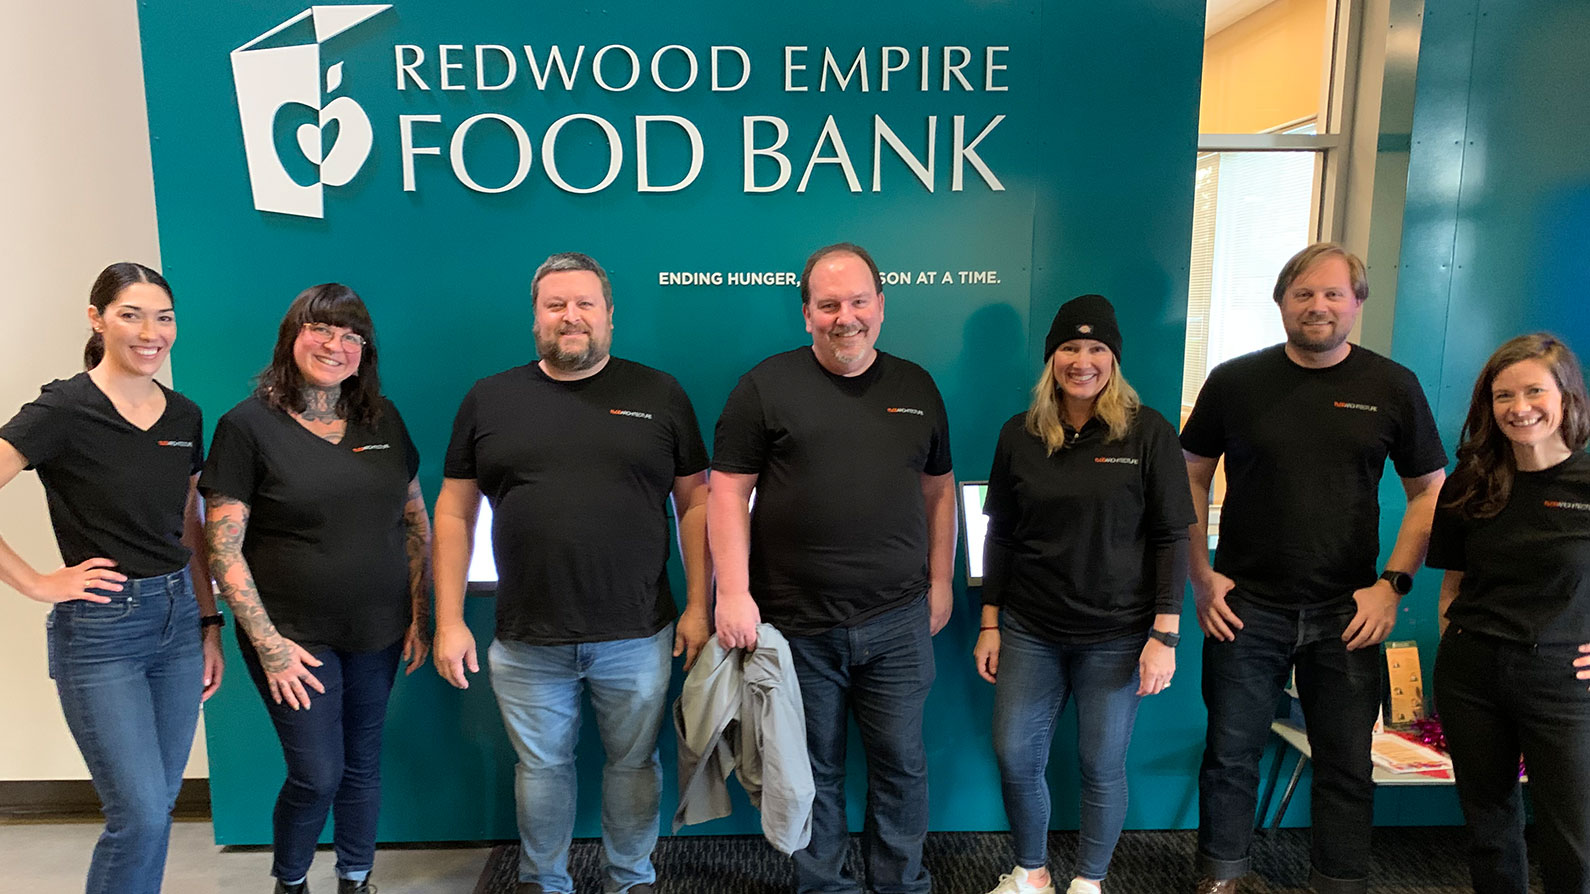 TLCD team lined up under sign at Redwood Empire Food Bank